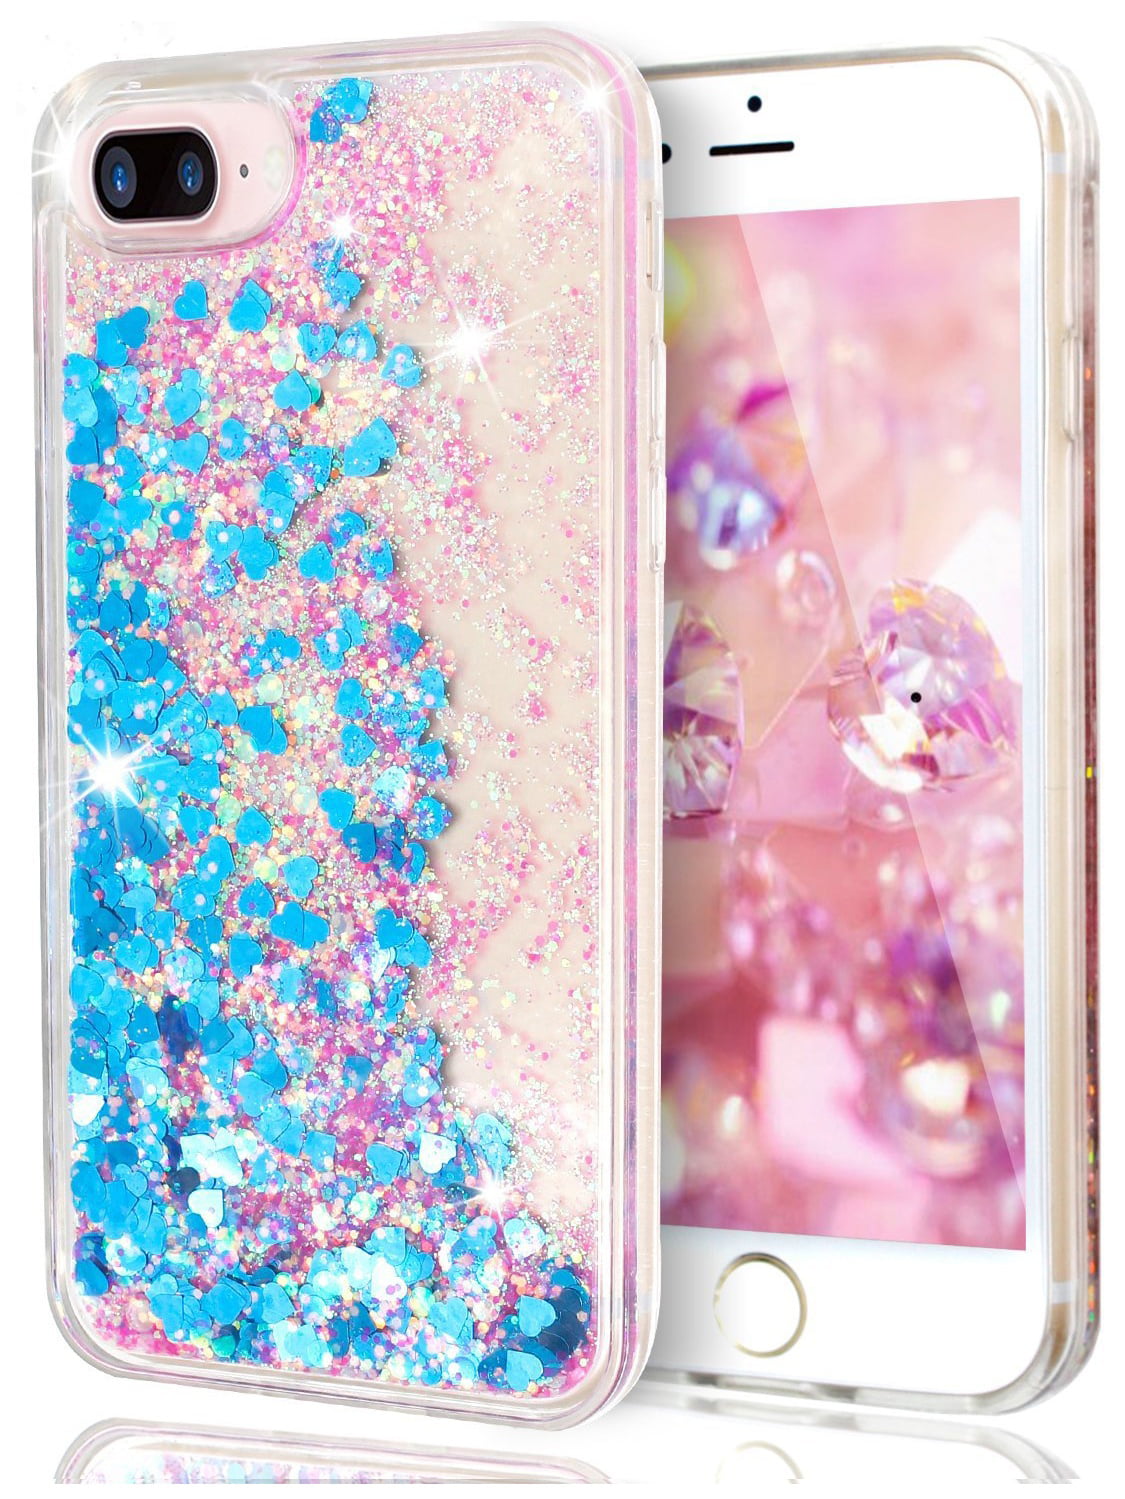 For iPhone 6 Plus 5.5" iPhone 6s Plus 5.5" Pink Floating Hearts Liquid Waterfall Sparkle Glitter Quicksand Case -